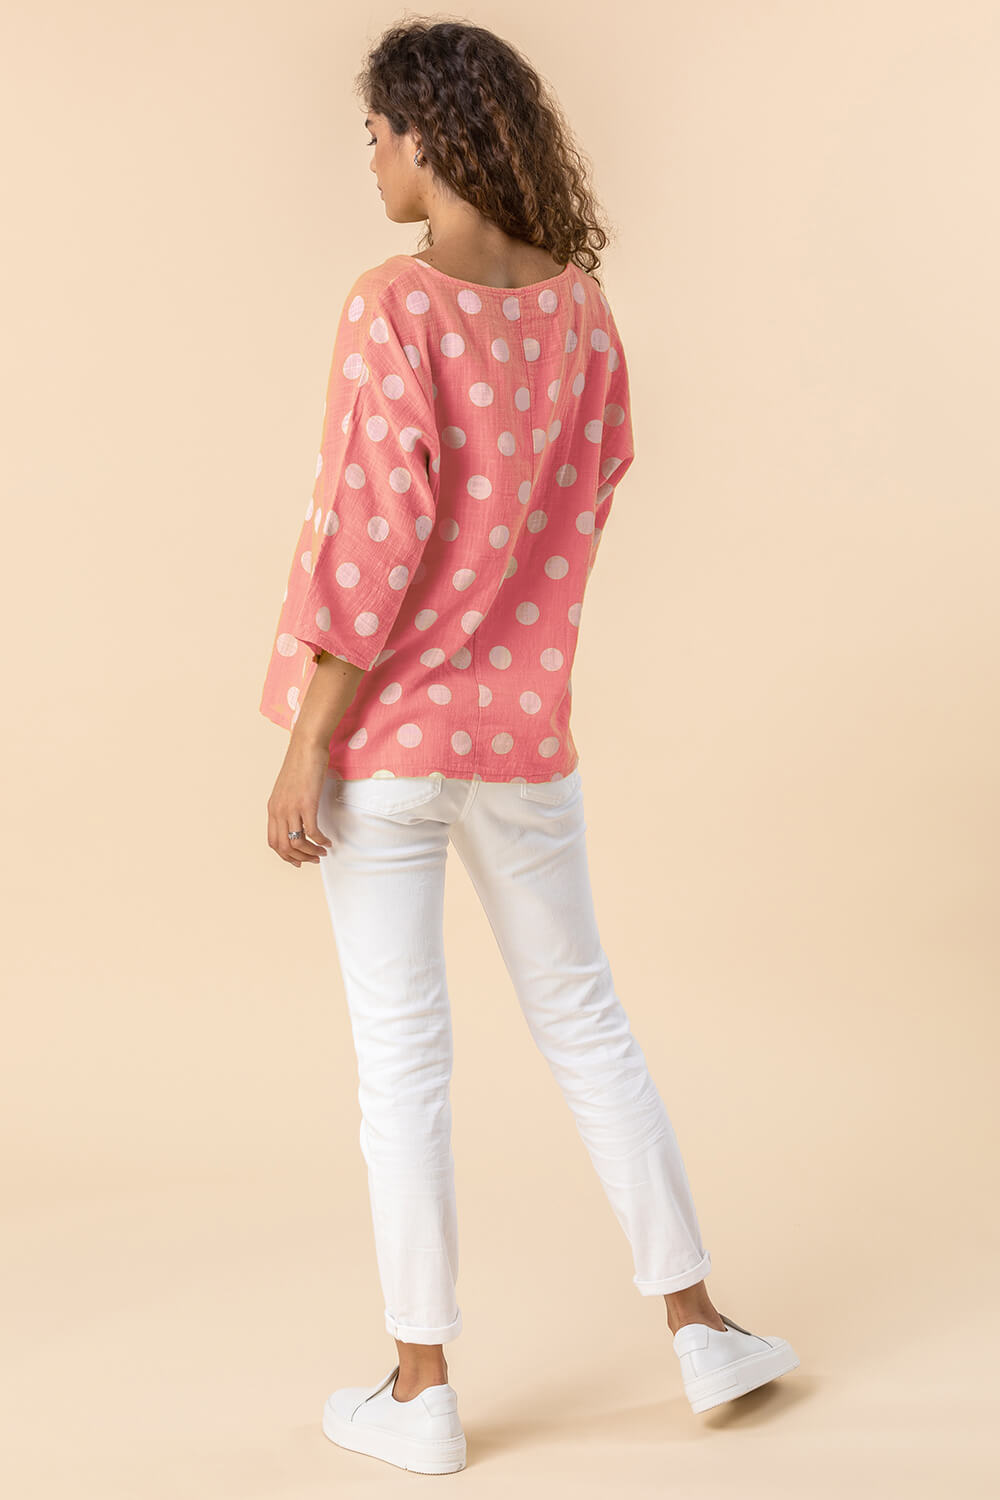 CORAL Spot Print 3/4 Sleeve Top, Image 2 of 4